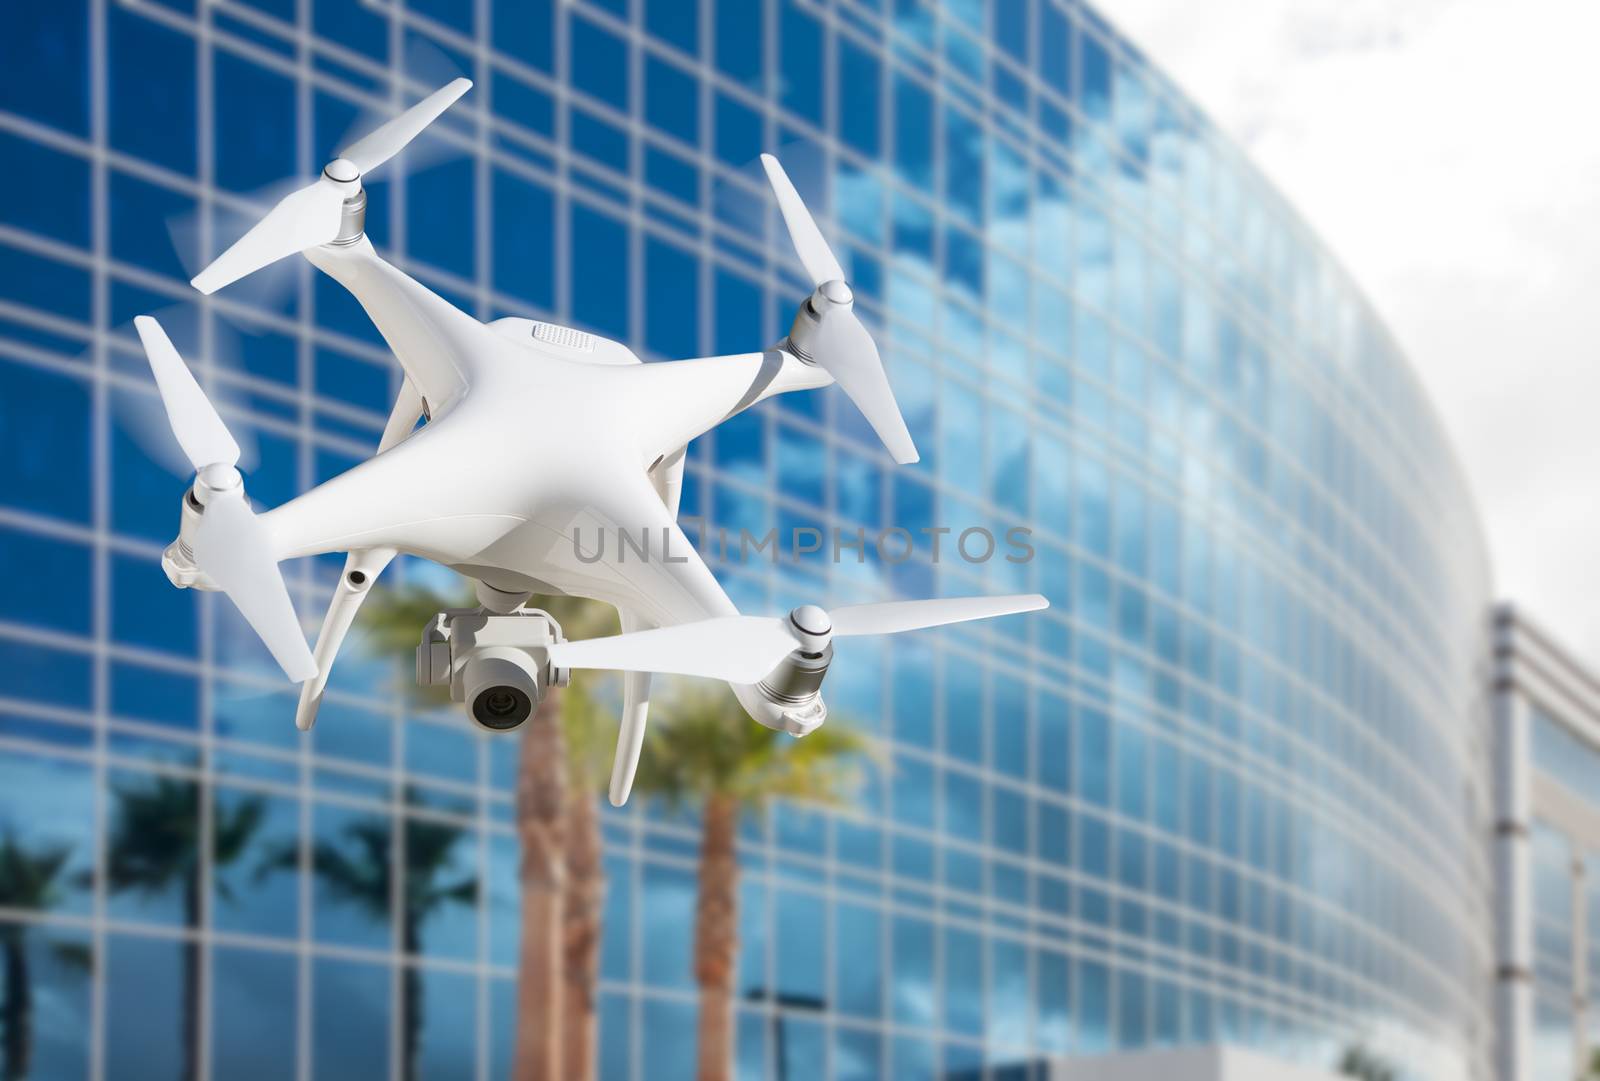 Unmanned Aircraft System (UAS) Quadcopter Drone In The Air Near Corporate Building. by Feverpitched